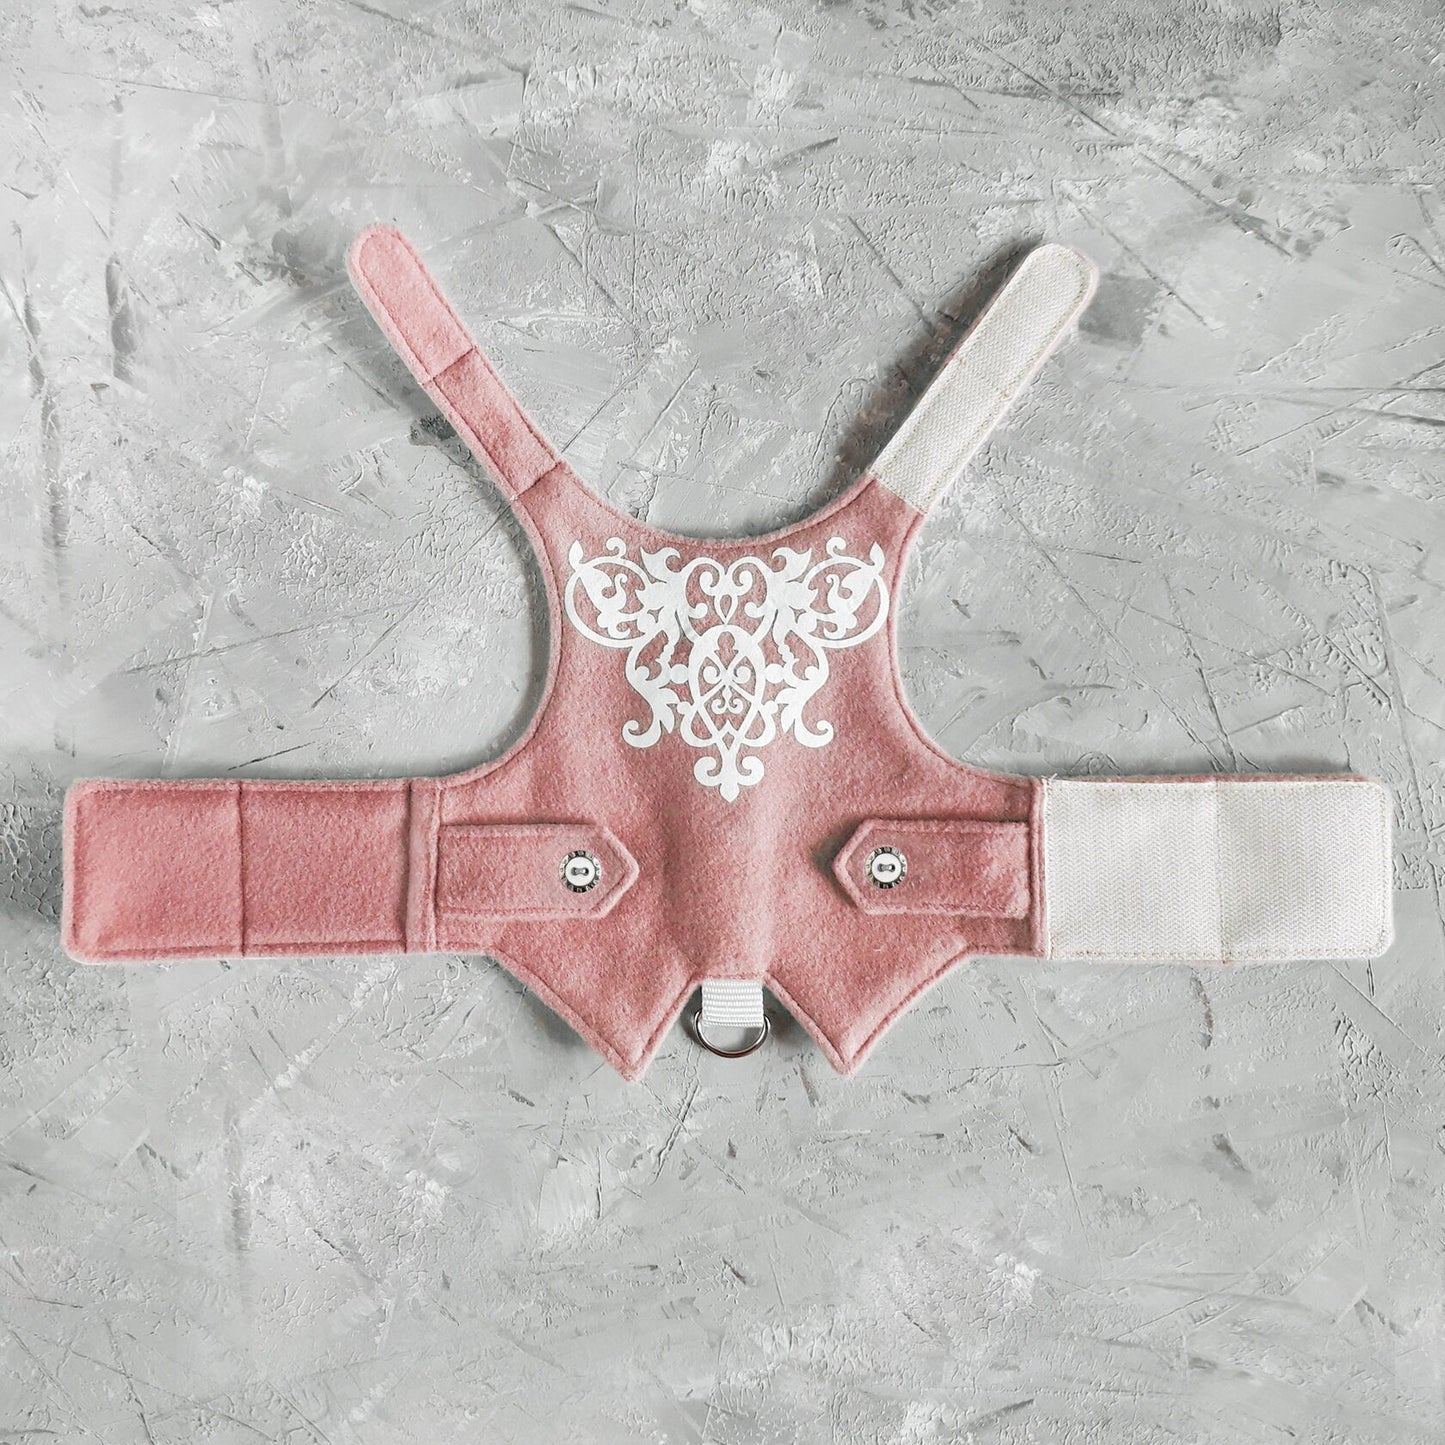 Difficult to escape pink woolen cat harness with white openwork design